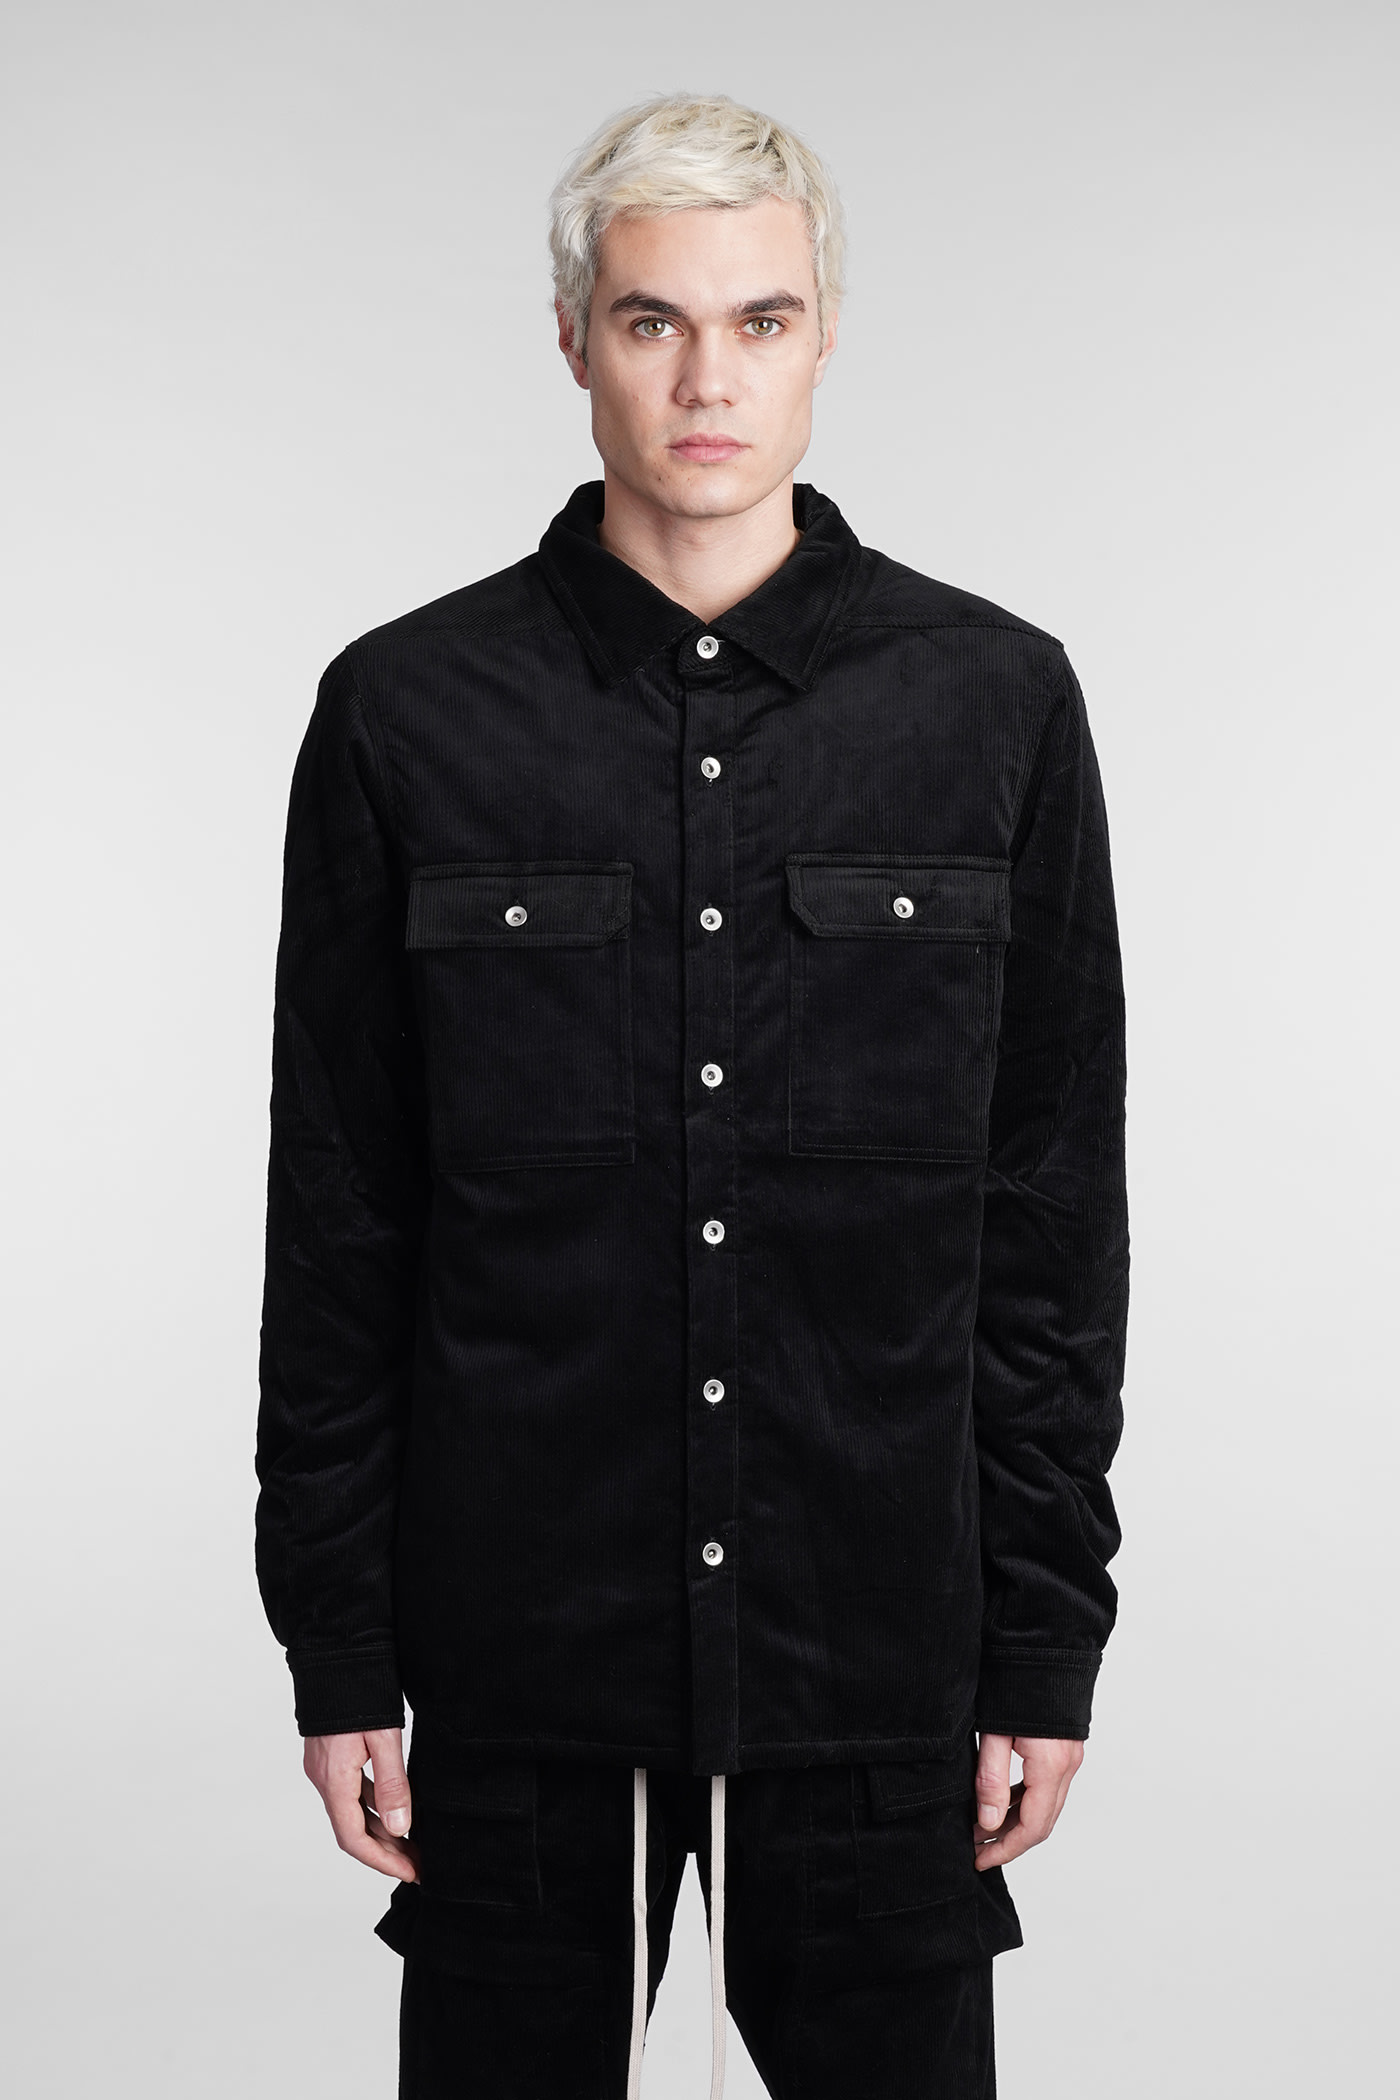 DRKSHDW OUTESHIRT CASUAL JACKET IN BLACK COTTON